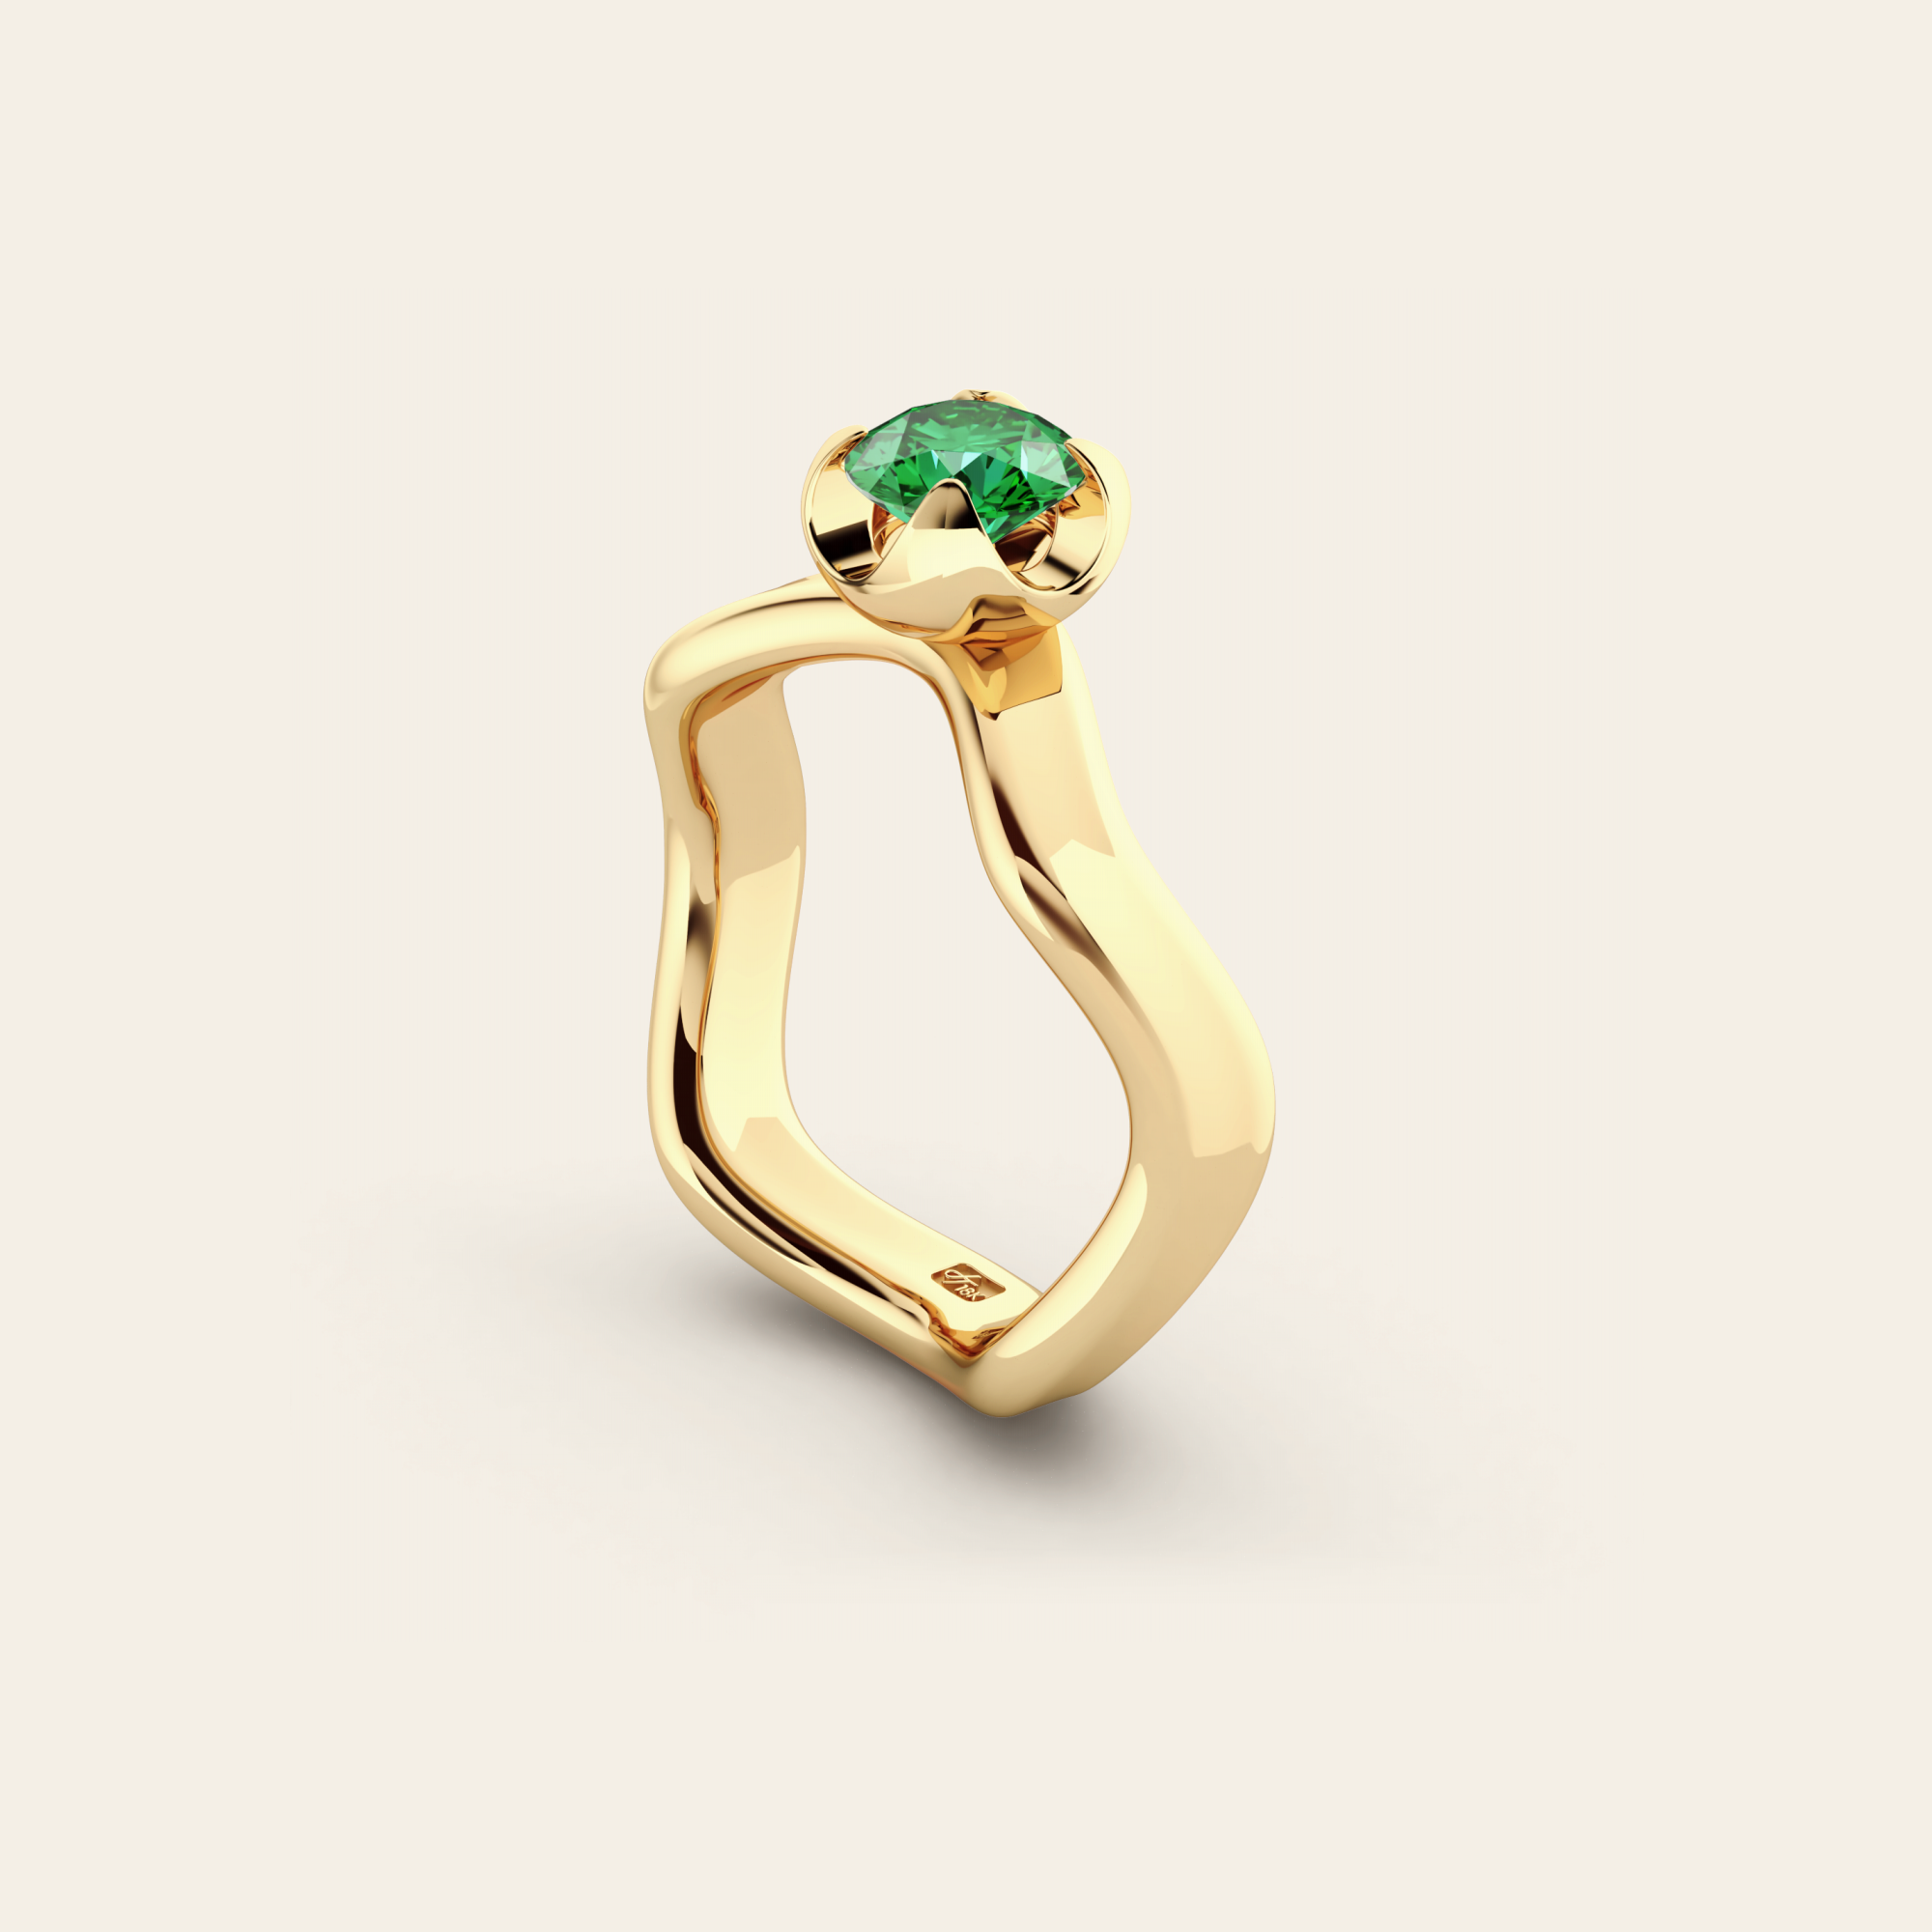 The Smooth Curve Ring with Tsavorite Garnet in 18k Yellow Gold